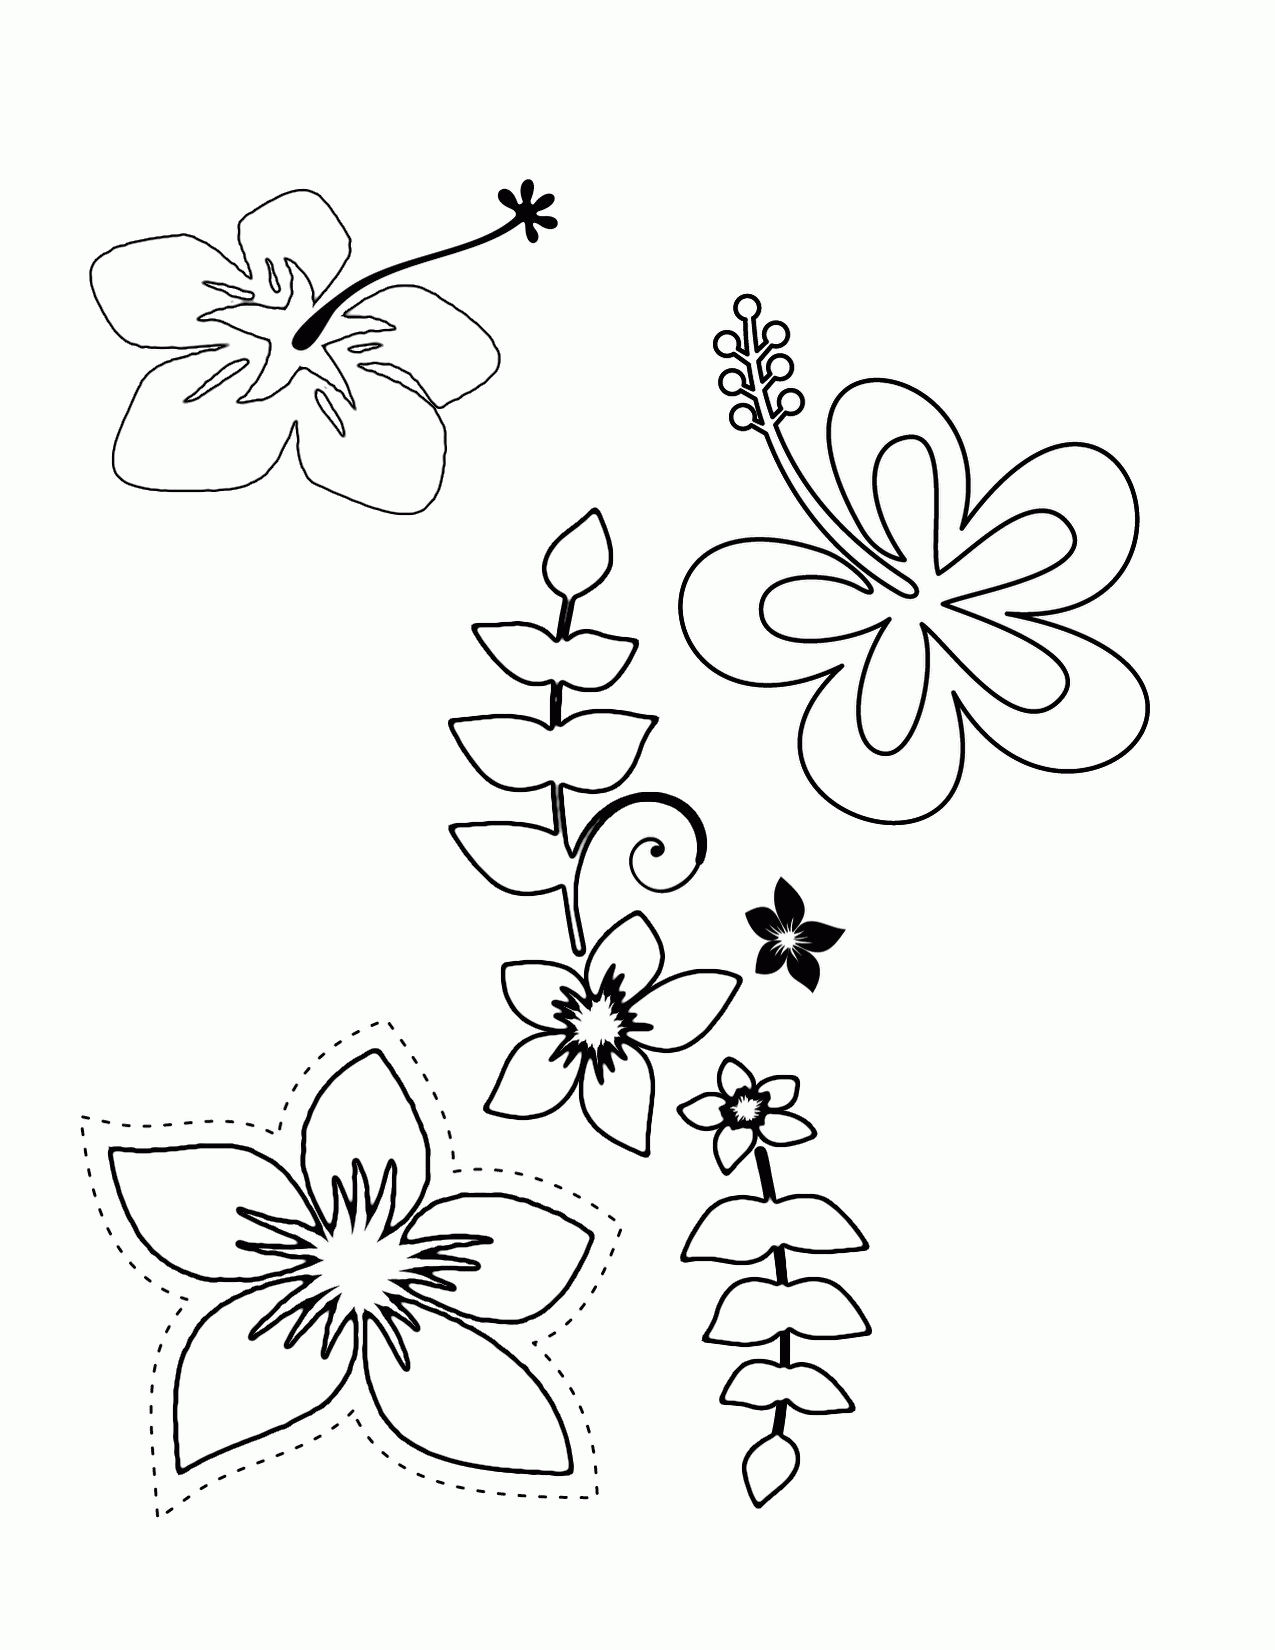 free hawaiian themed coloring pages | Best Coloring Page Site